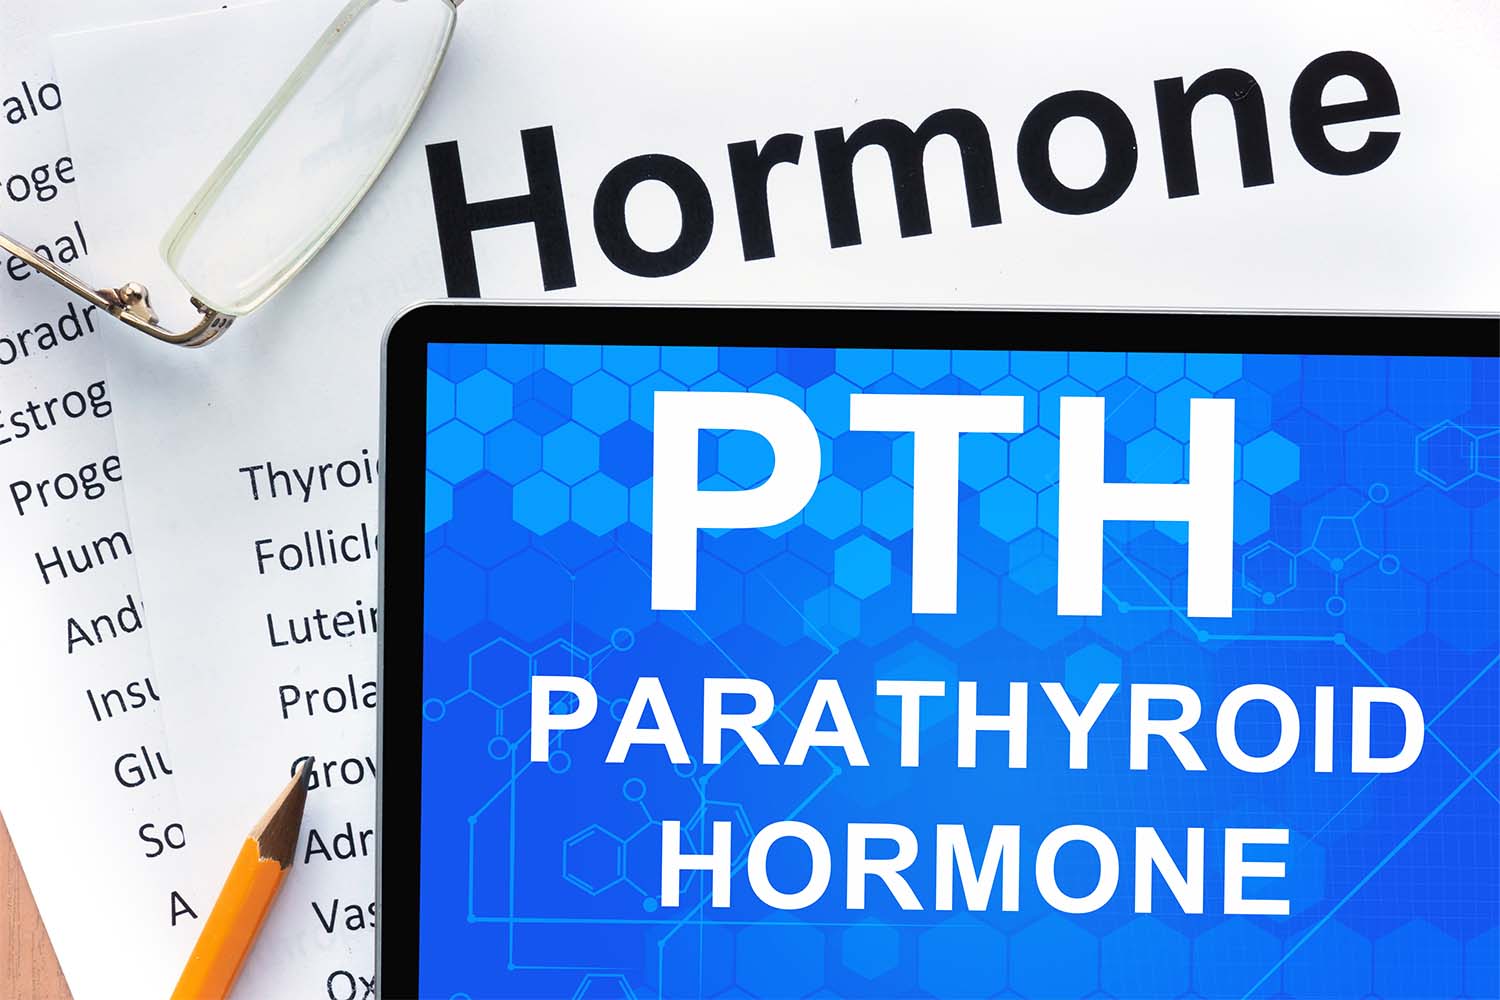 What Does Parathyroid Hormone Do?